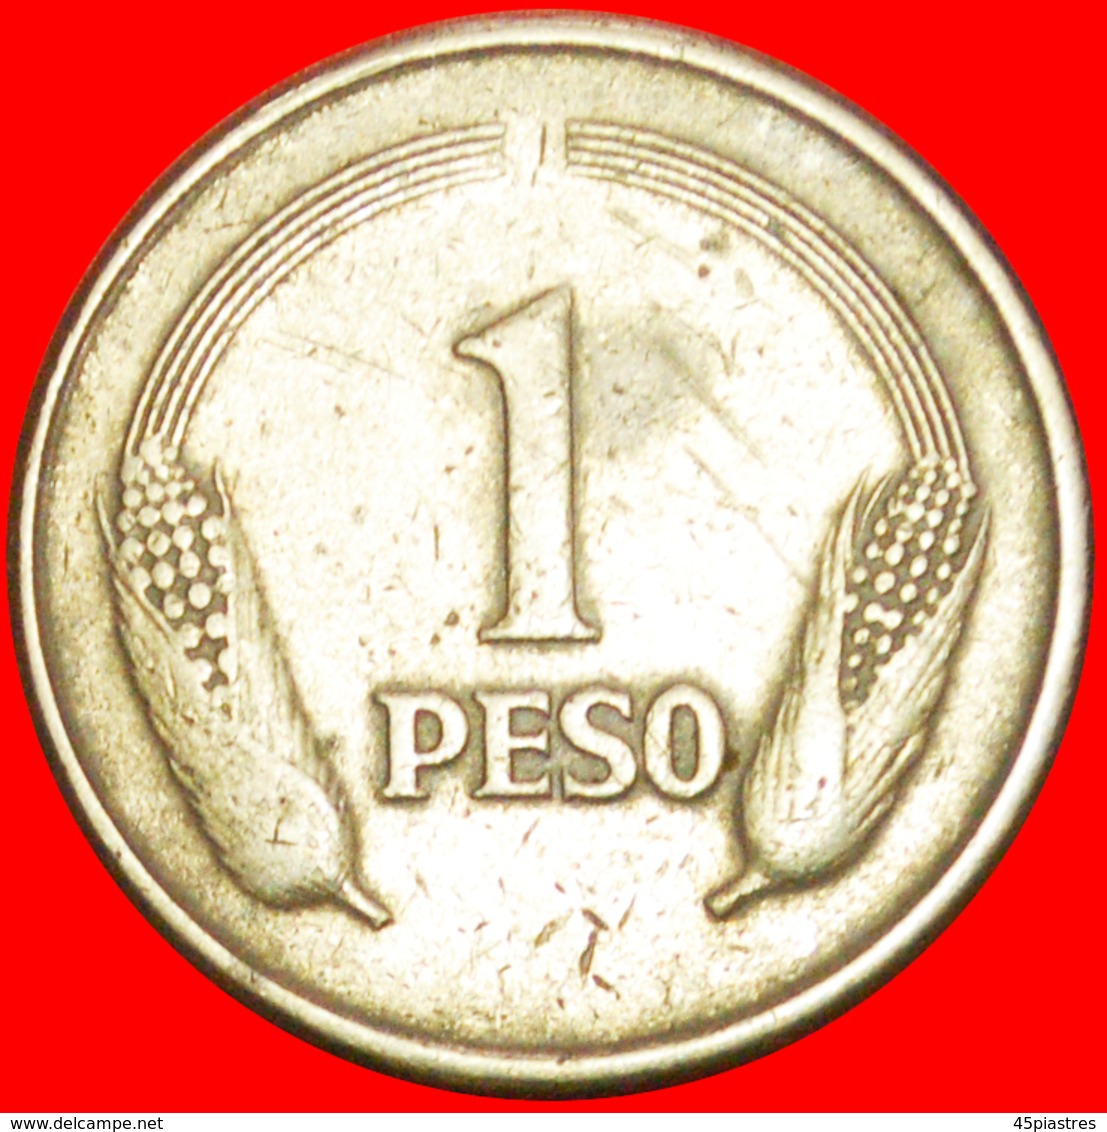 + BOLIVAR (1819-1830): COLOMBIA ★ 1 PESO 1980! LOW START ★ NO RESERVE! - Colombia